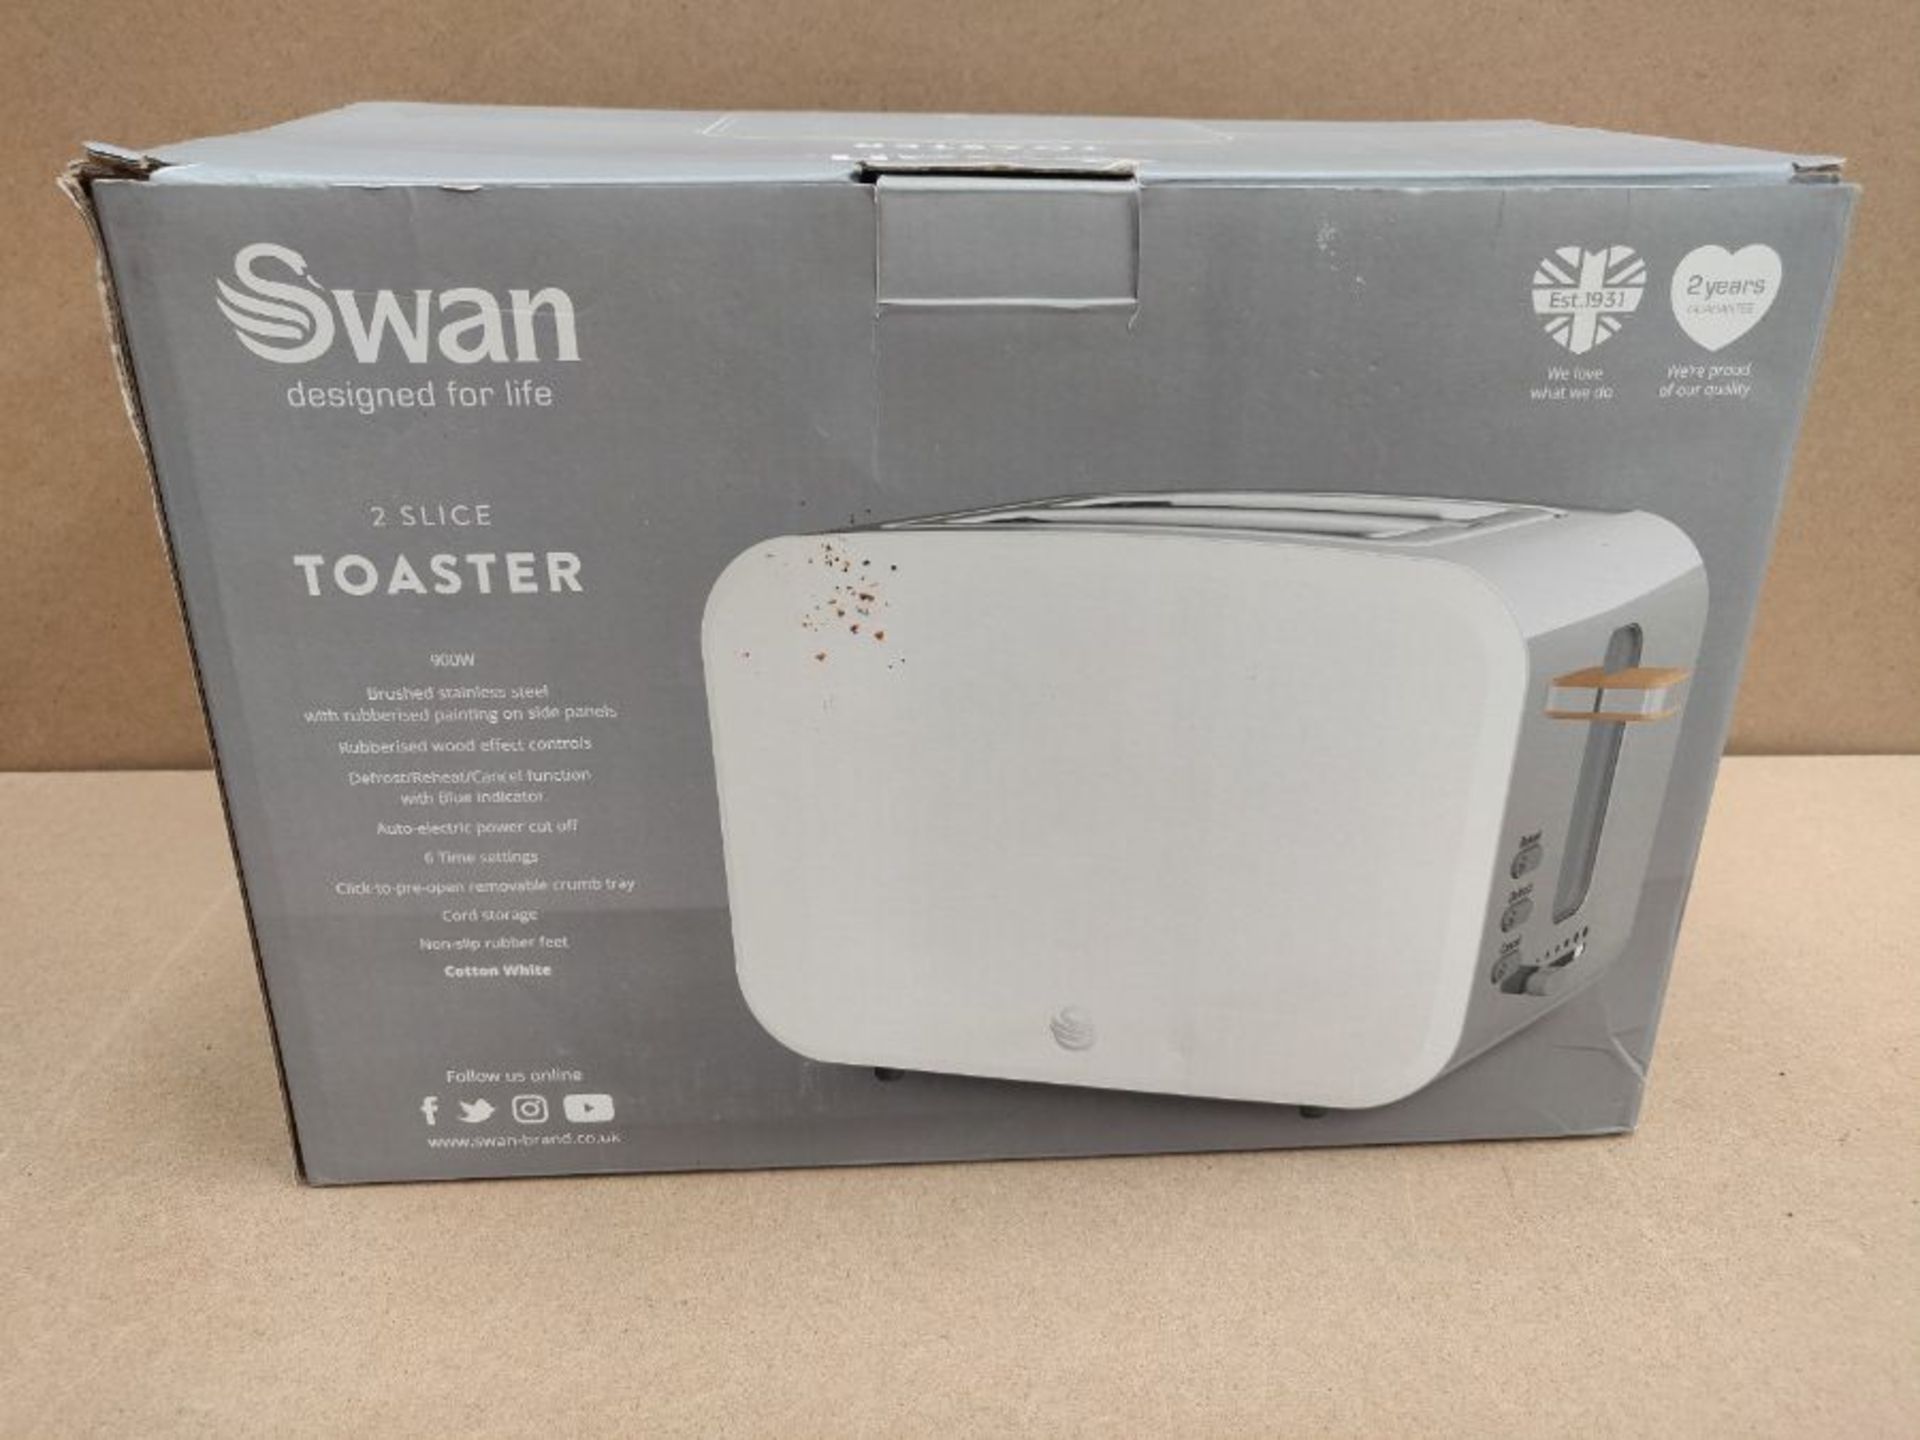 Swan Nordic Wide Slot Toaster with 2 Slices, 3 Functions, 6 Browning Levels, Modern De - Image 2 of 3